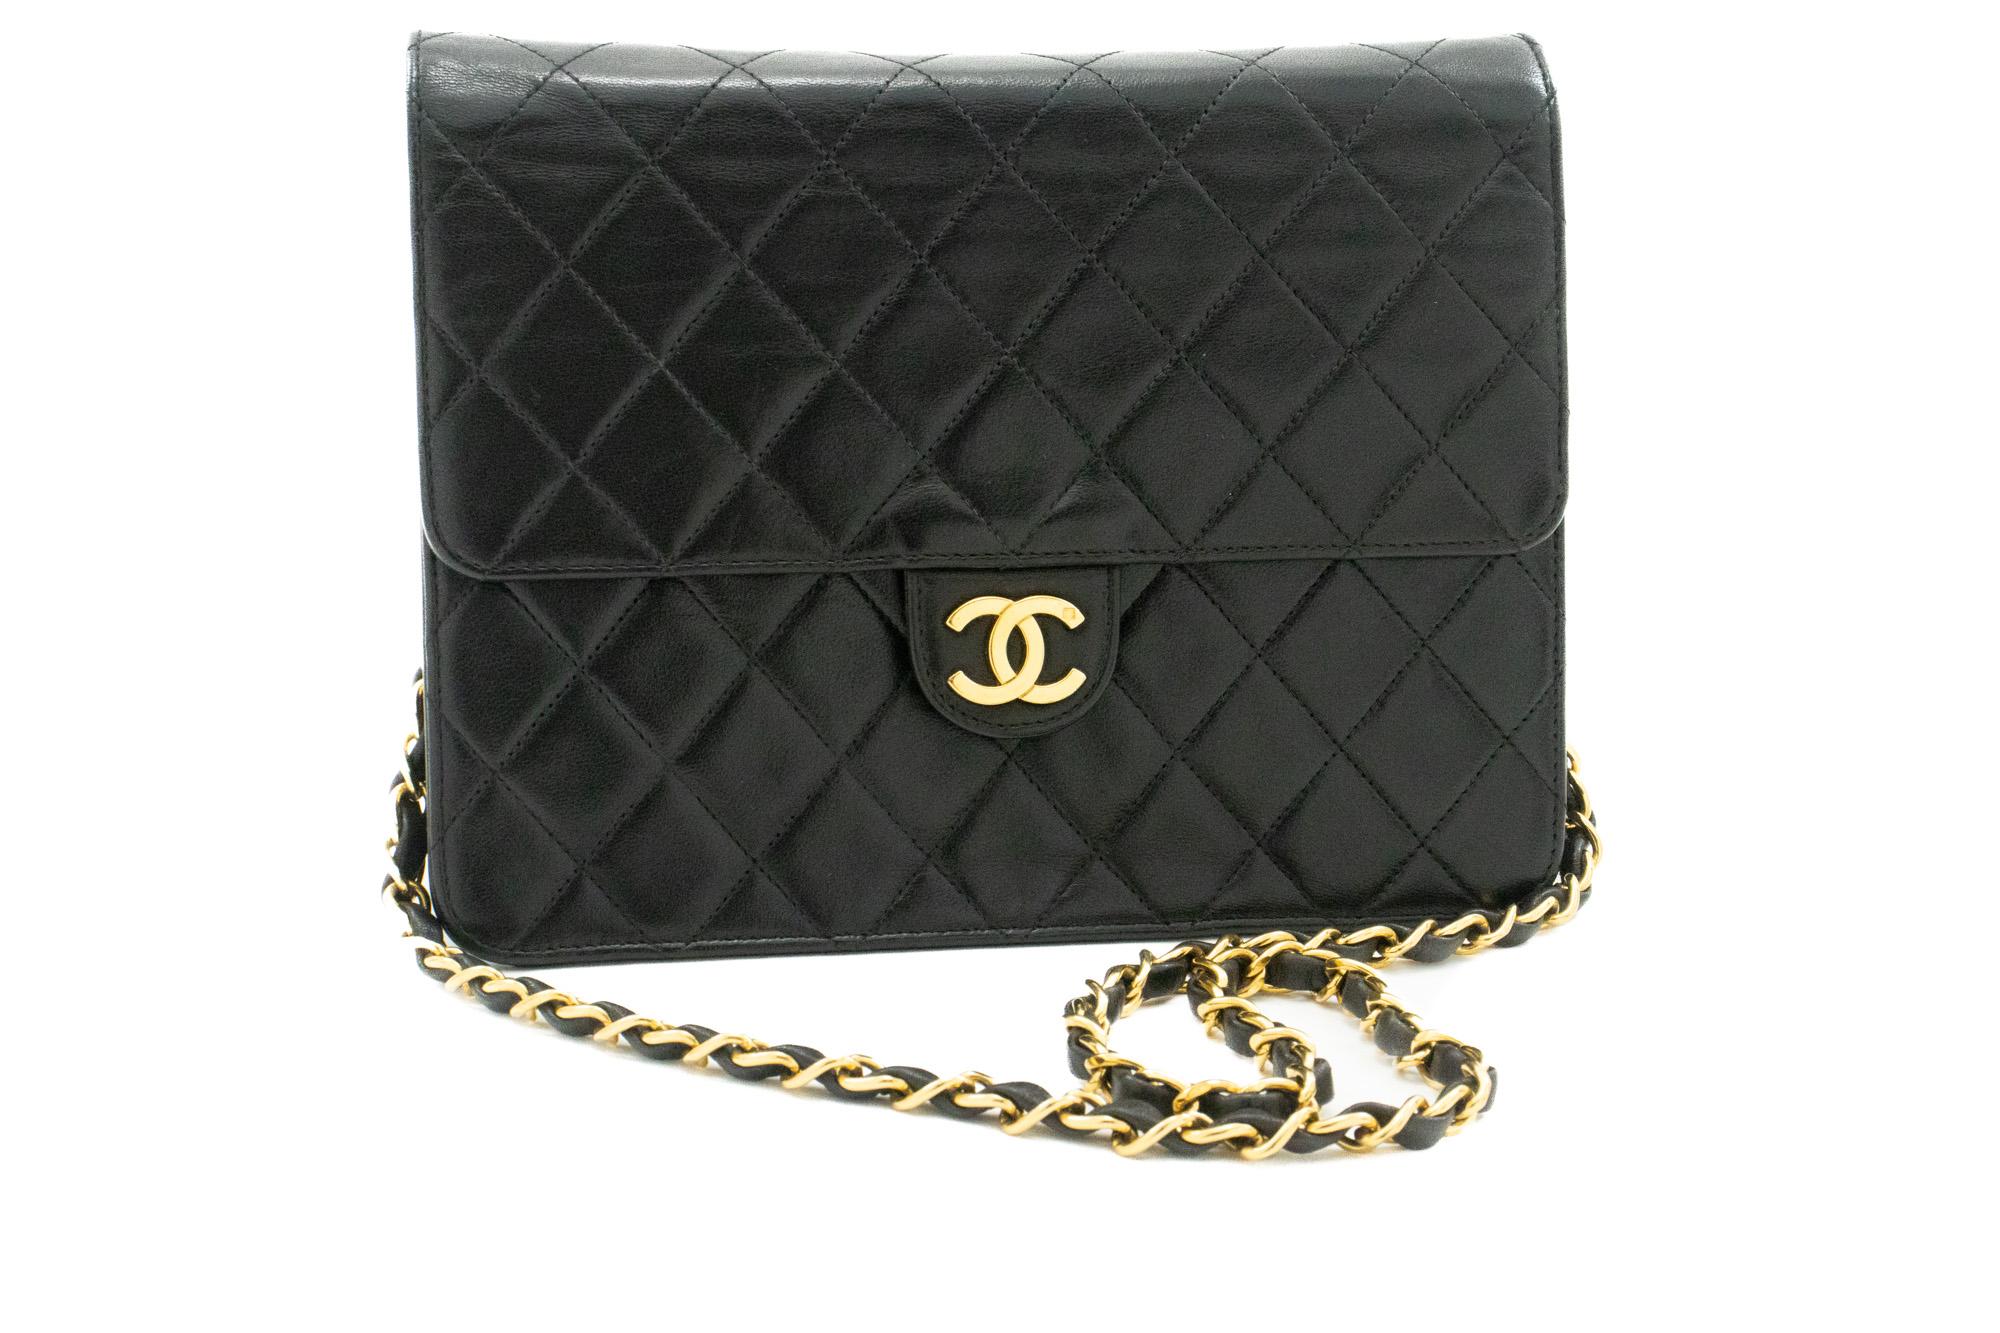 An authentic CHANEL Small Chain Shoulder Bag Clutch Black Quilted Flap made of black Lambskin. The color is Black. The outside material is Leather. The pattern is Solid. This item is Vintage / Classic. The year of manufacture would be